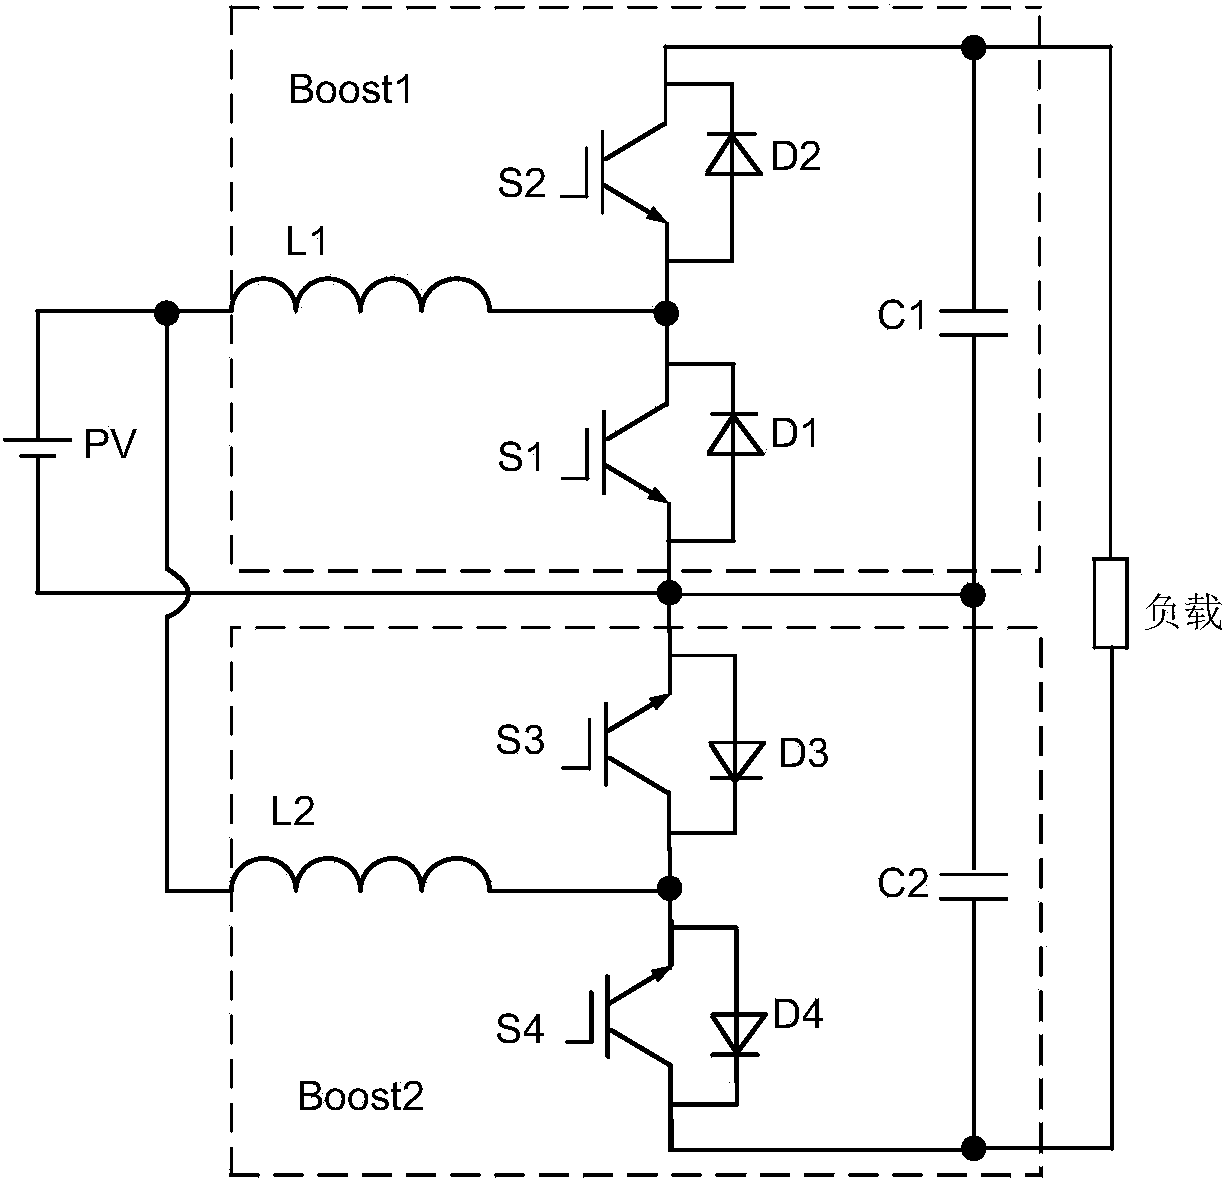 Half-cycle modulation method for double-Boost inverter